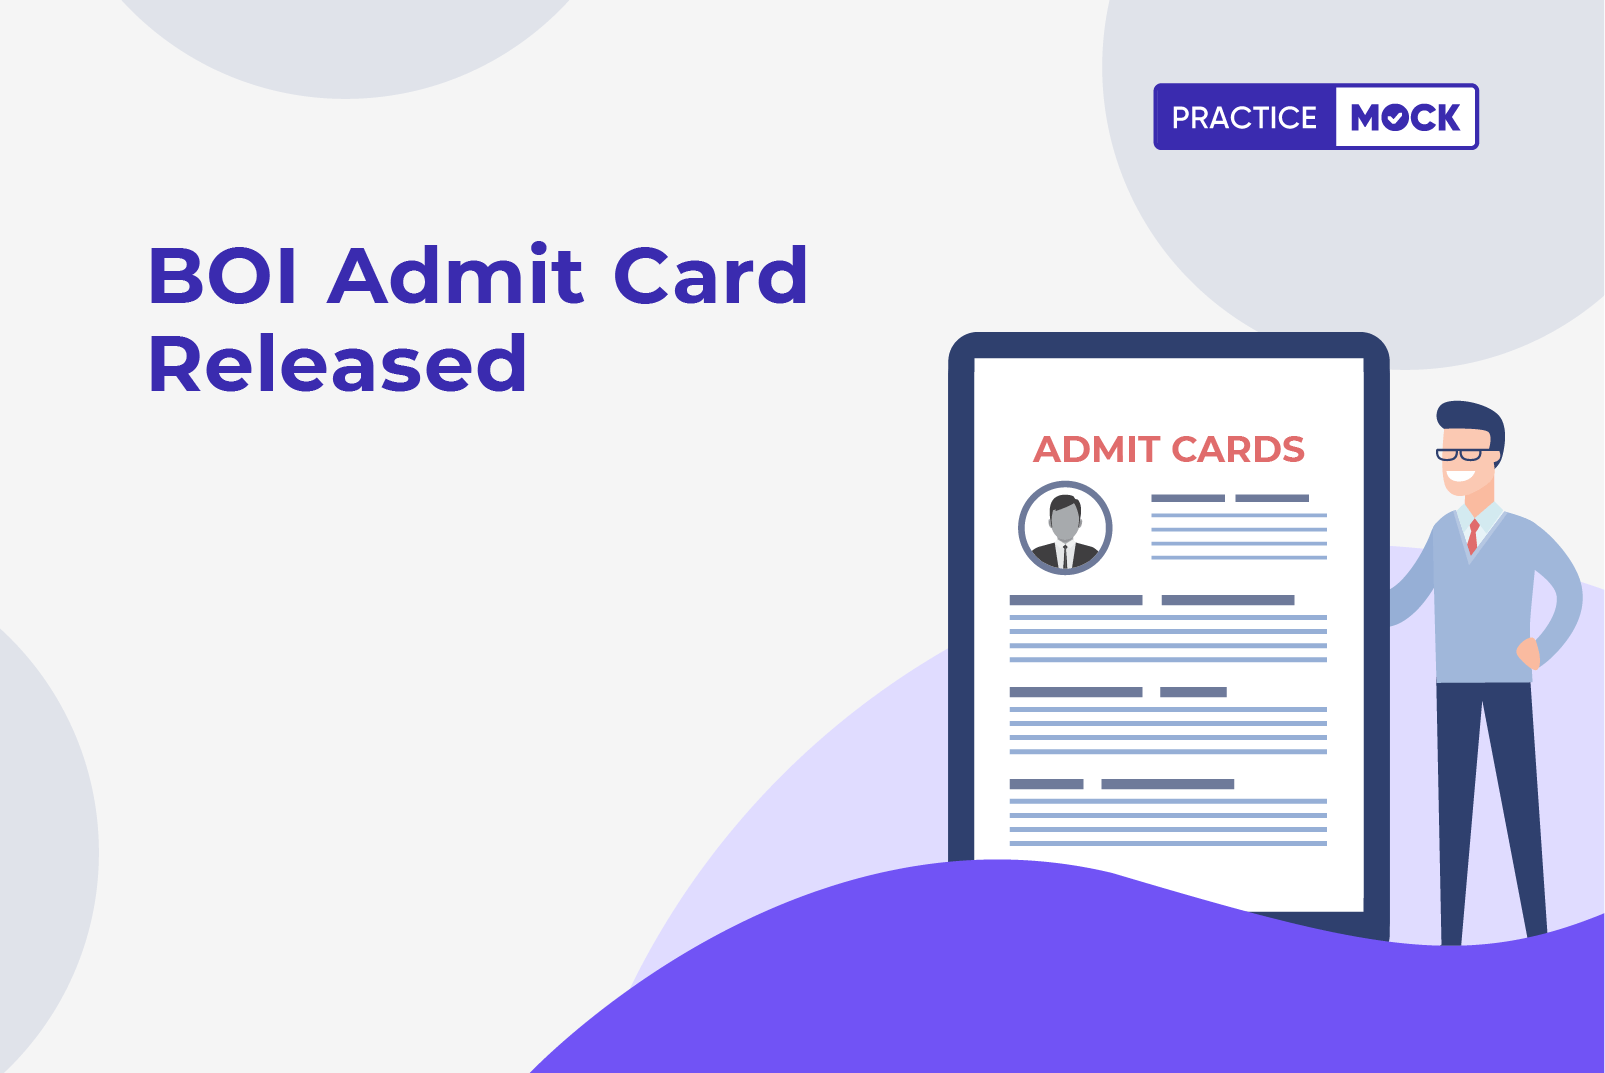 BOI Admit Card Released